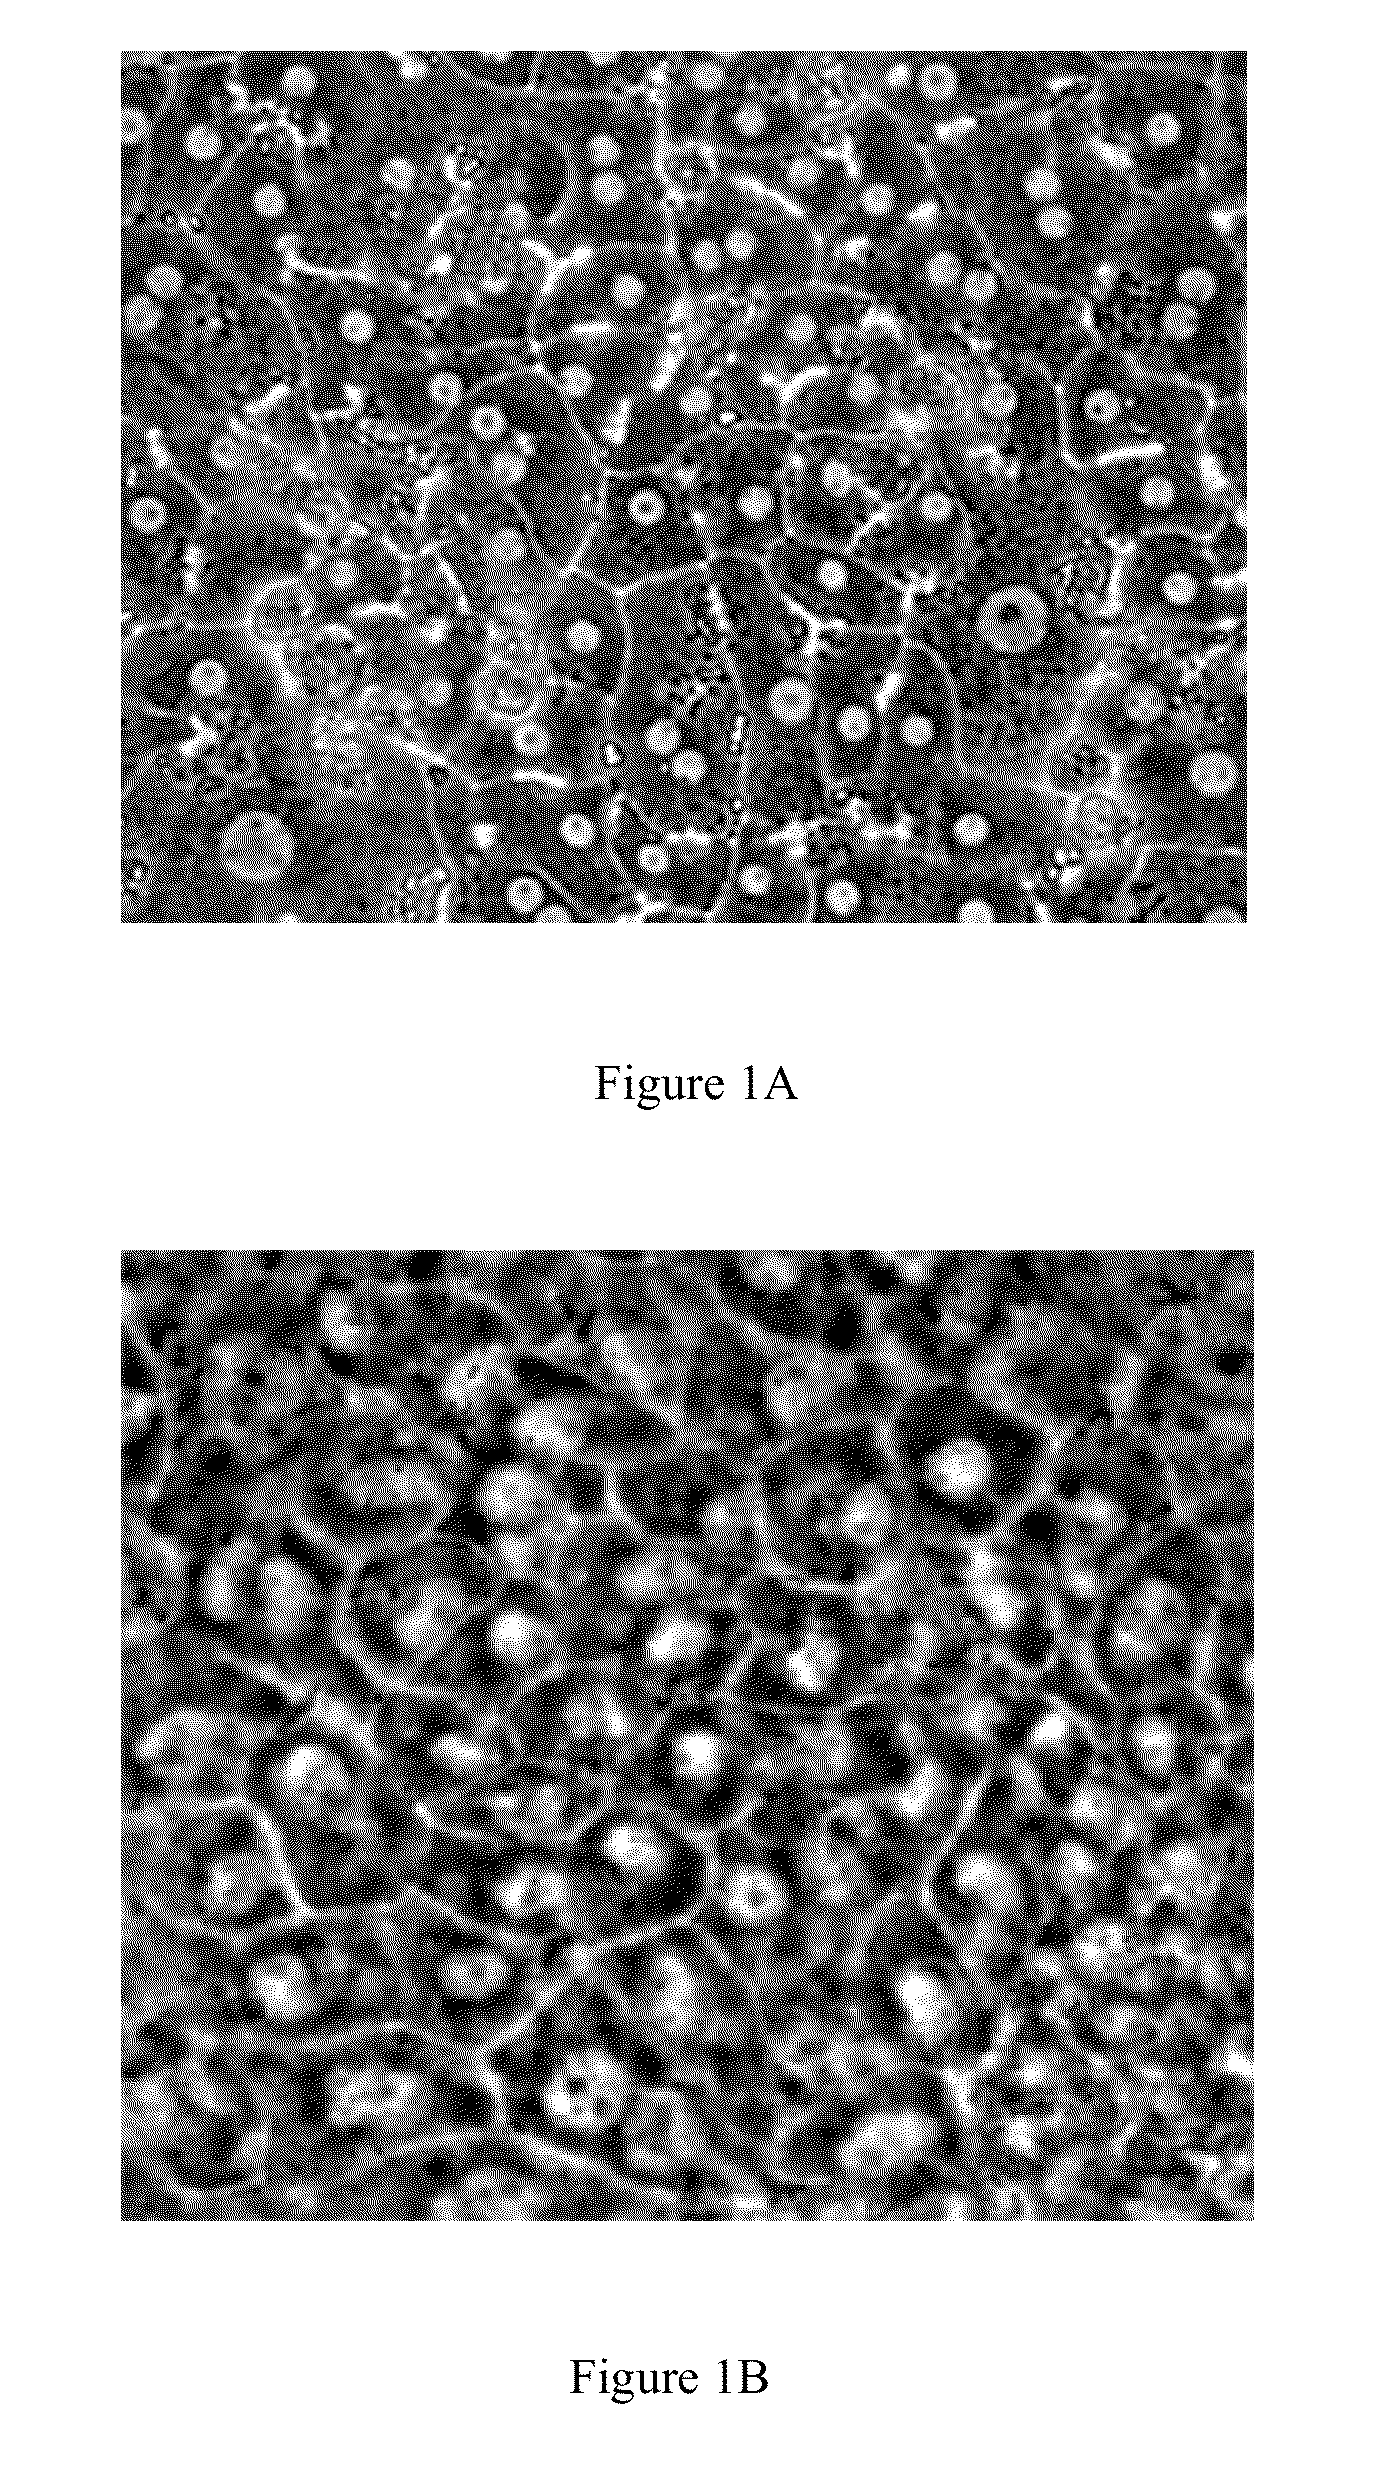 Method of deriving mature hepatocytes from human embryonic stem cells